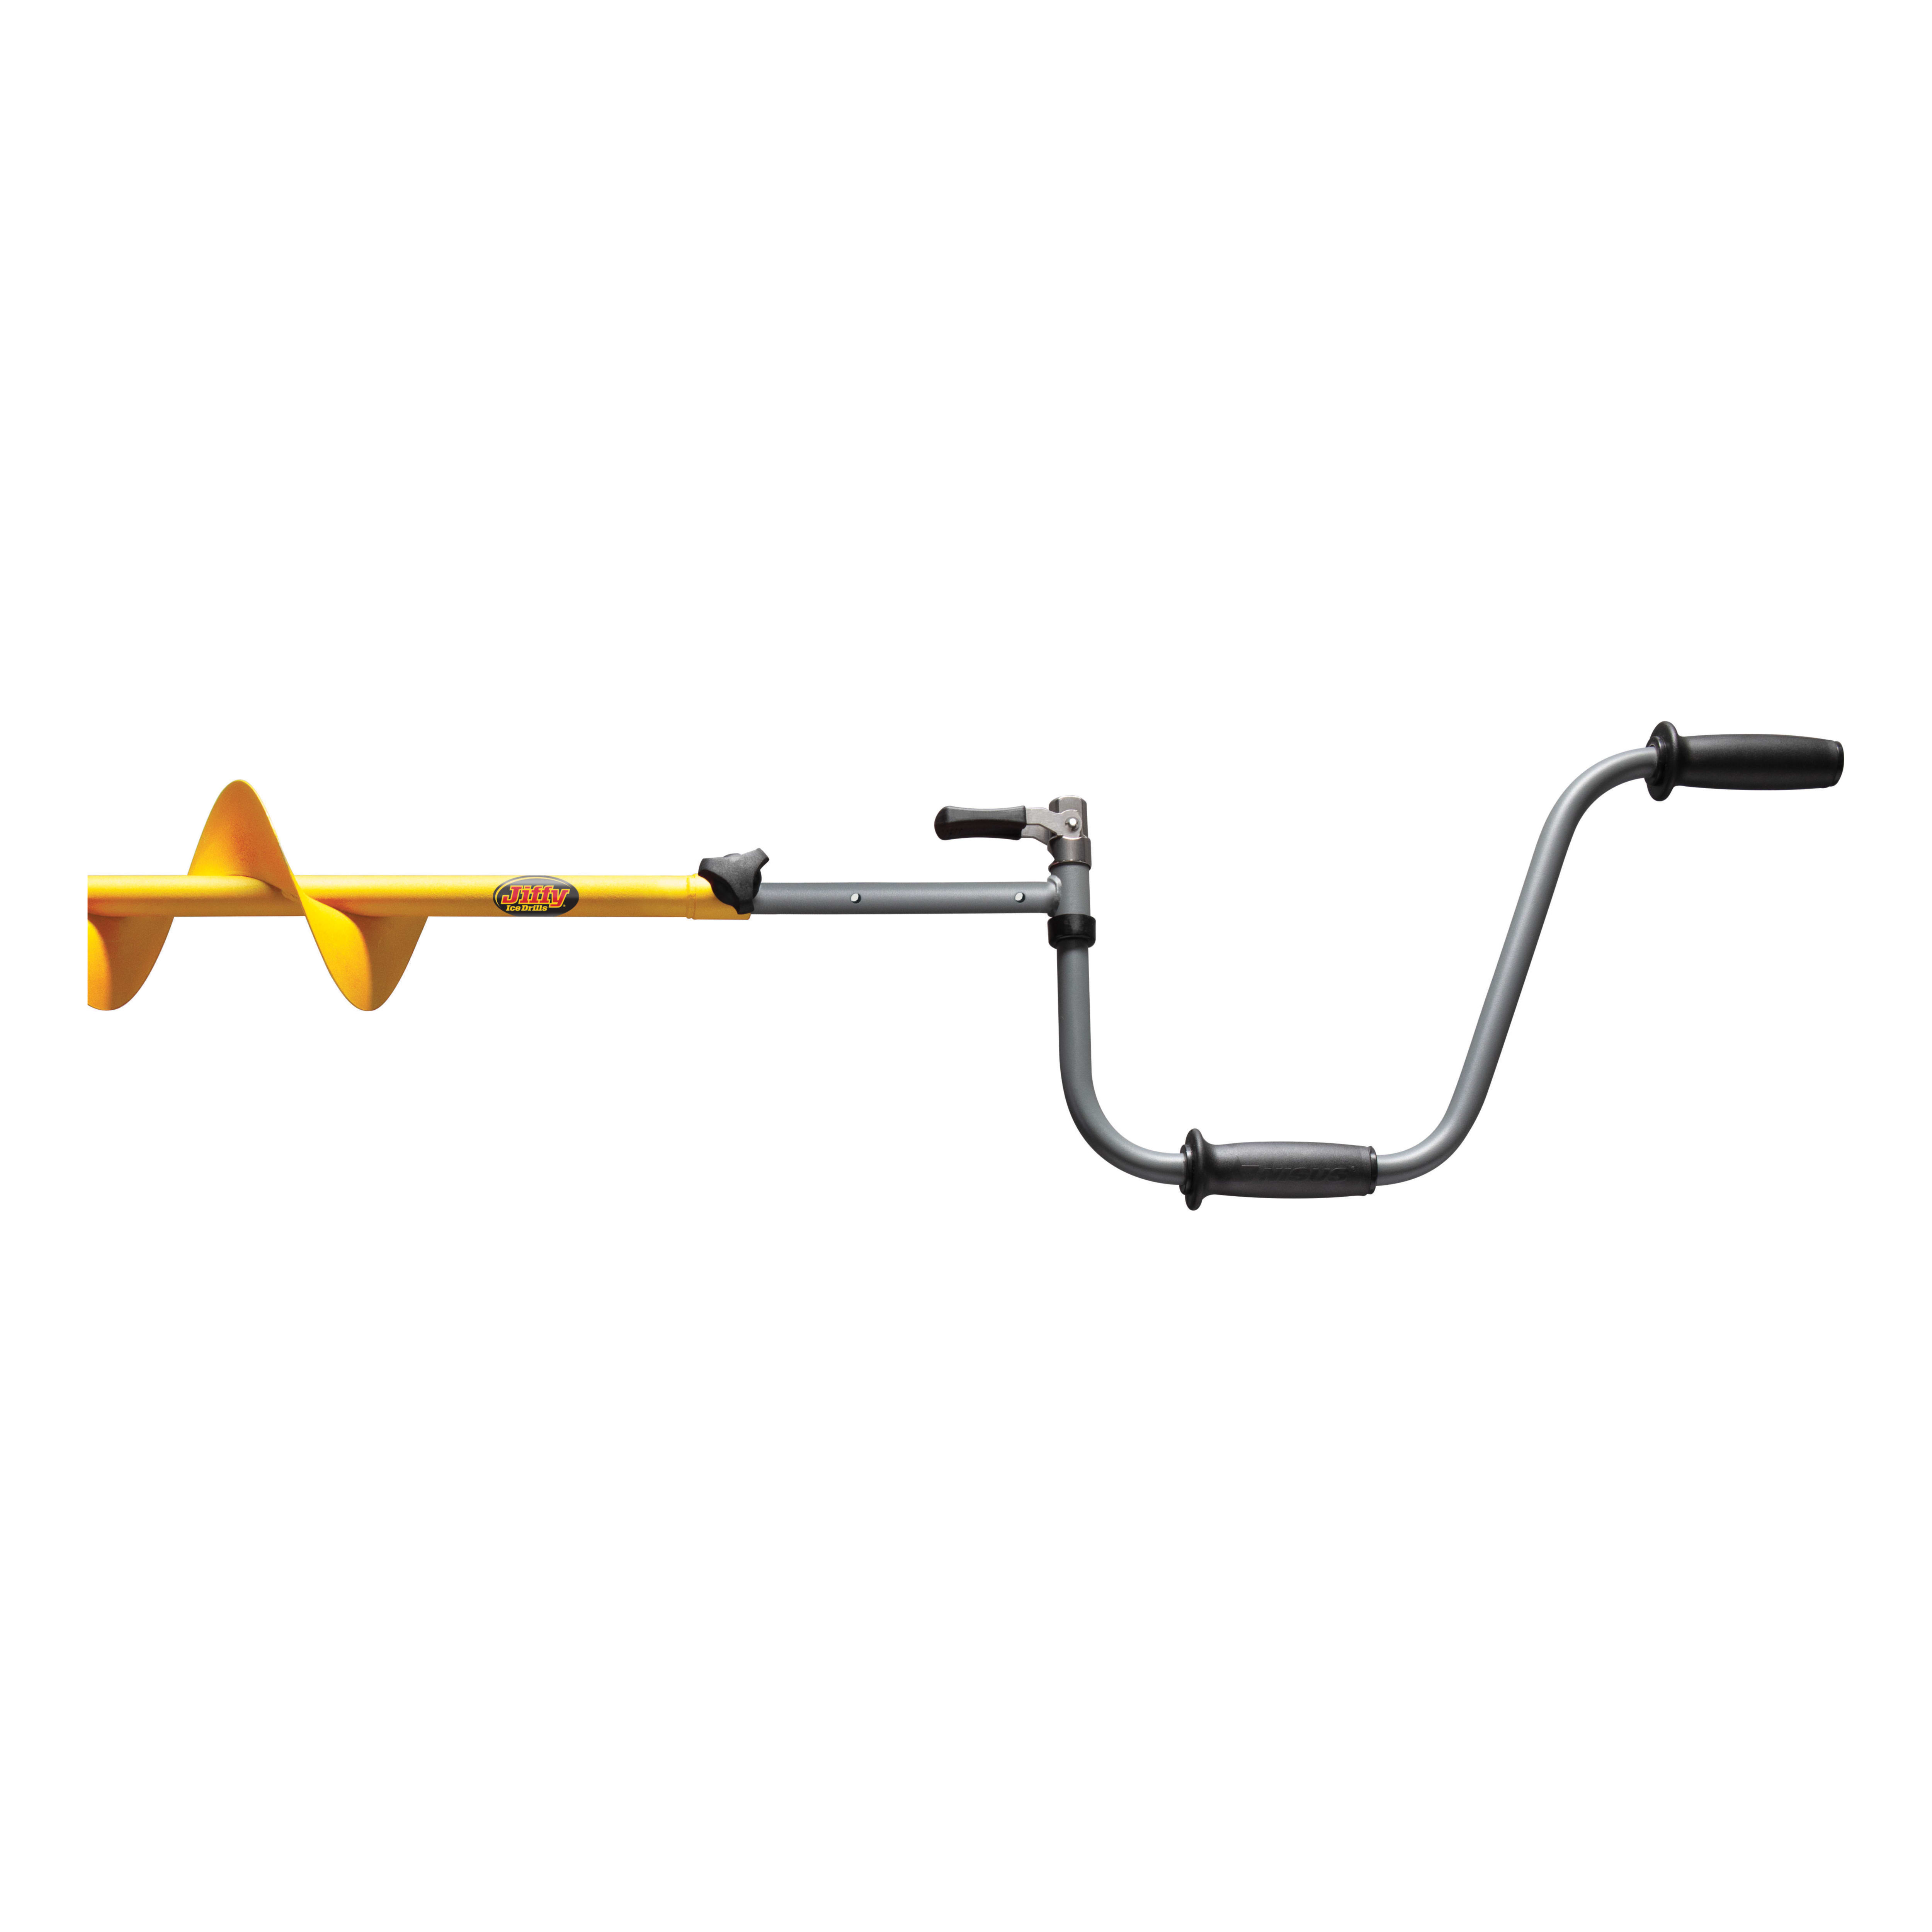 Jiffy® Hand Auger